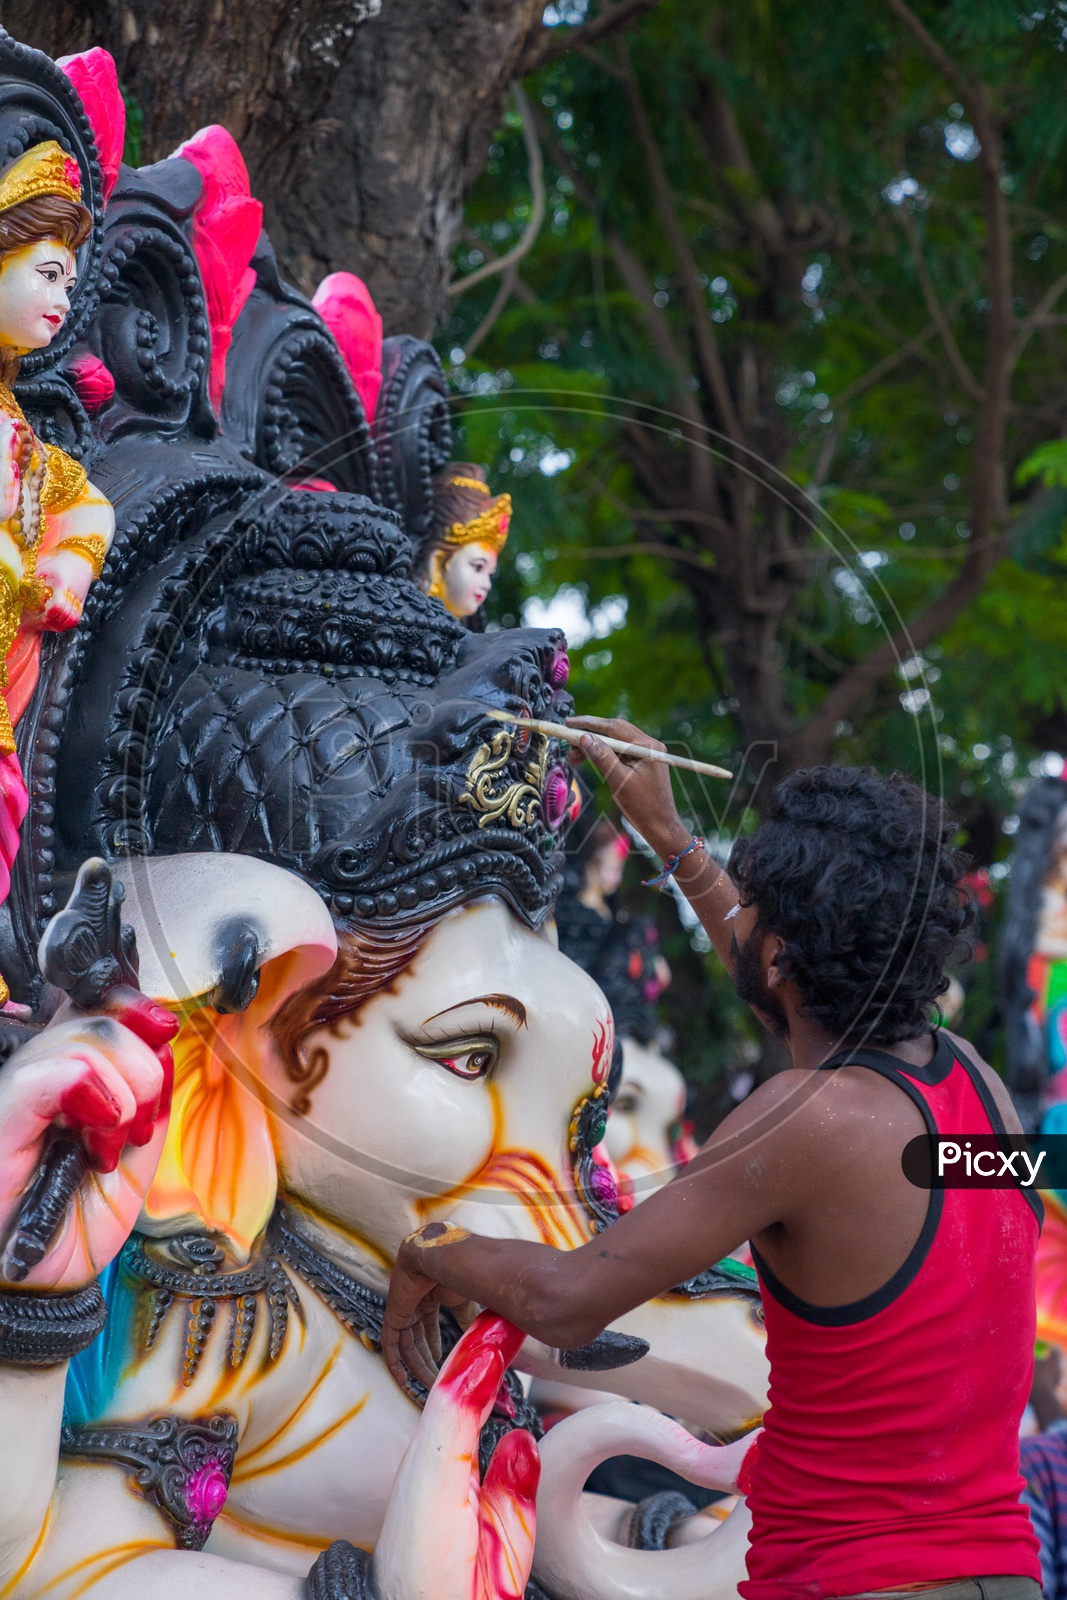 A person giving the final touches to the ganesha idol